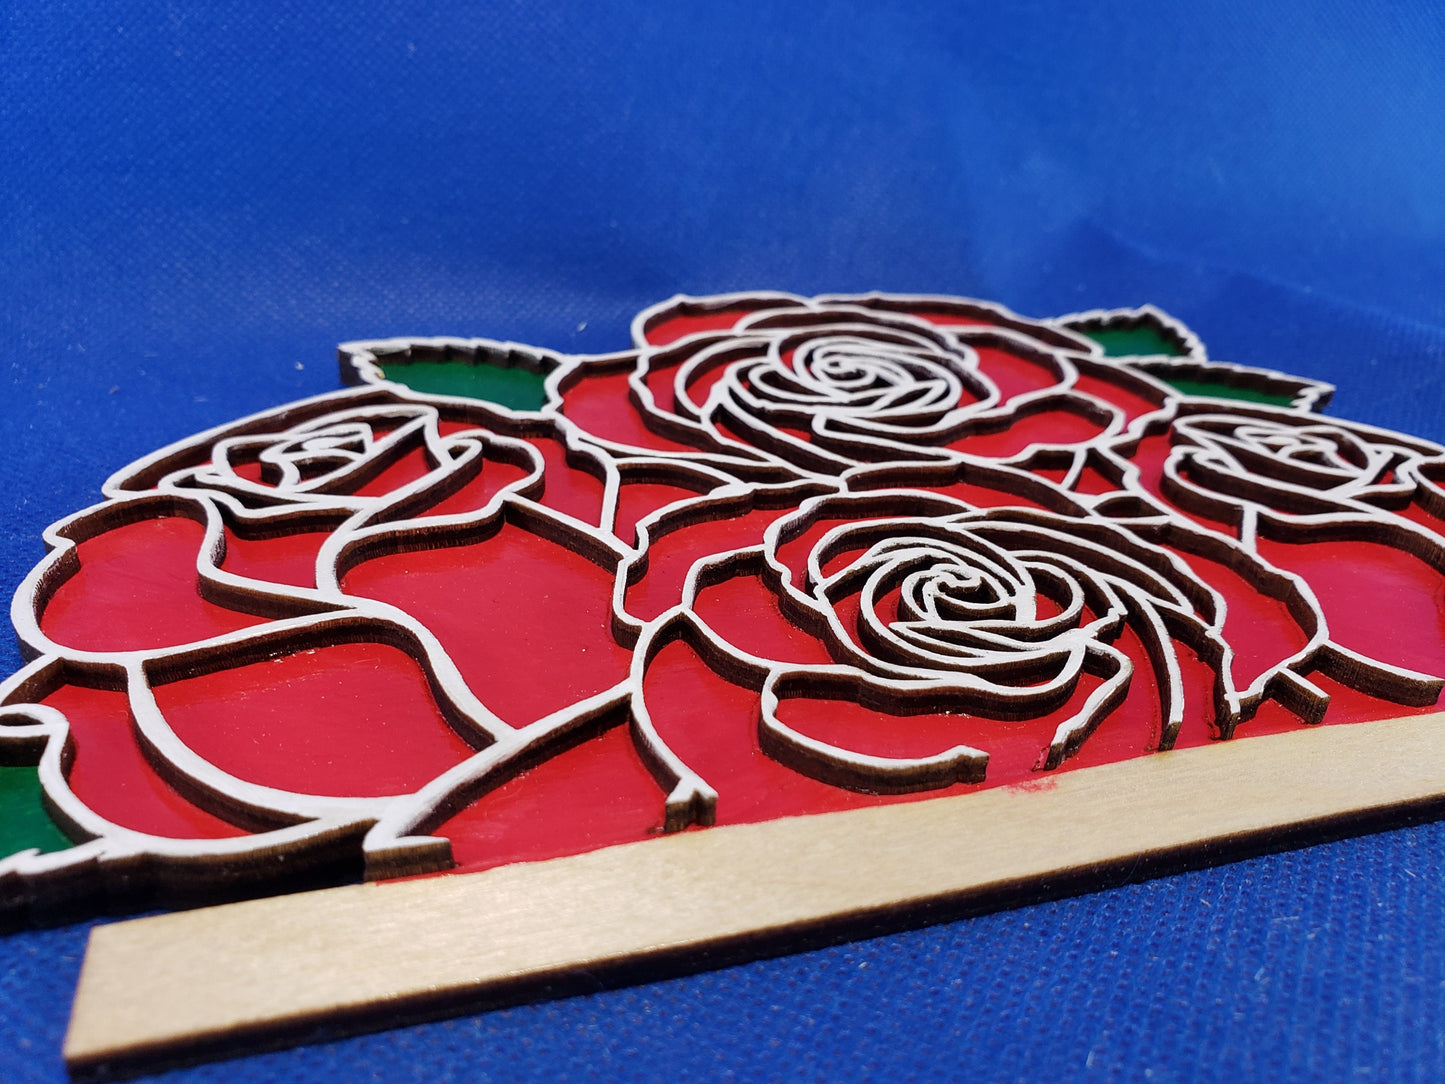 Roses Changeable Sign Insert - DIY unfinished Changeable sign insert